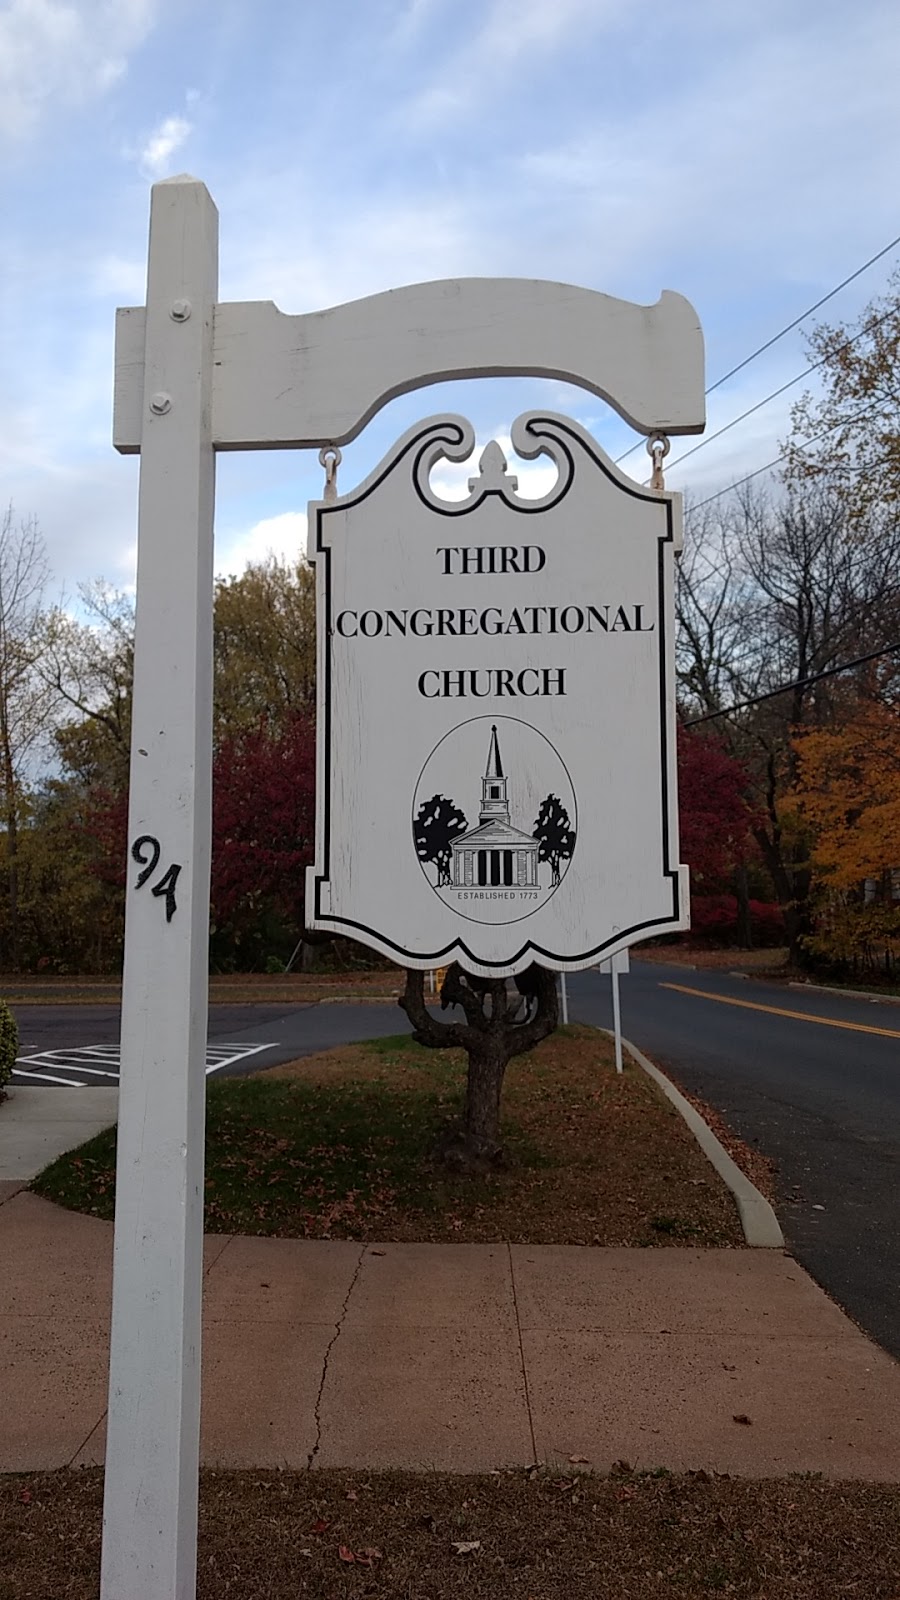 Third Congregational Church | 94 Miner St, Middletown, CT 06457 | Phone: (860) 632-0733